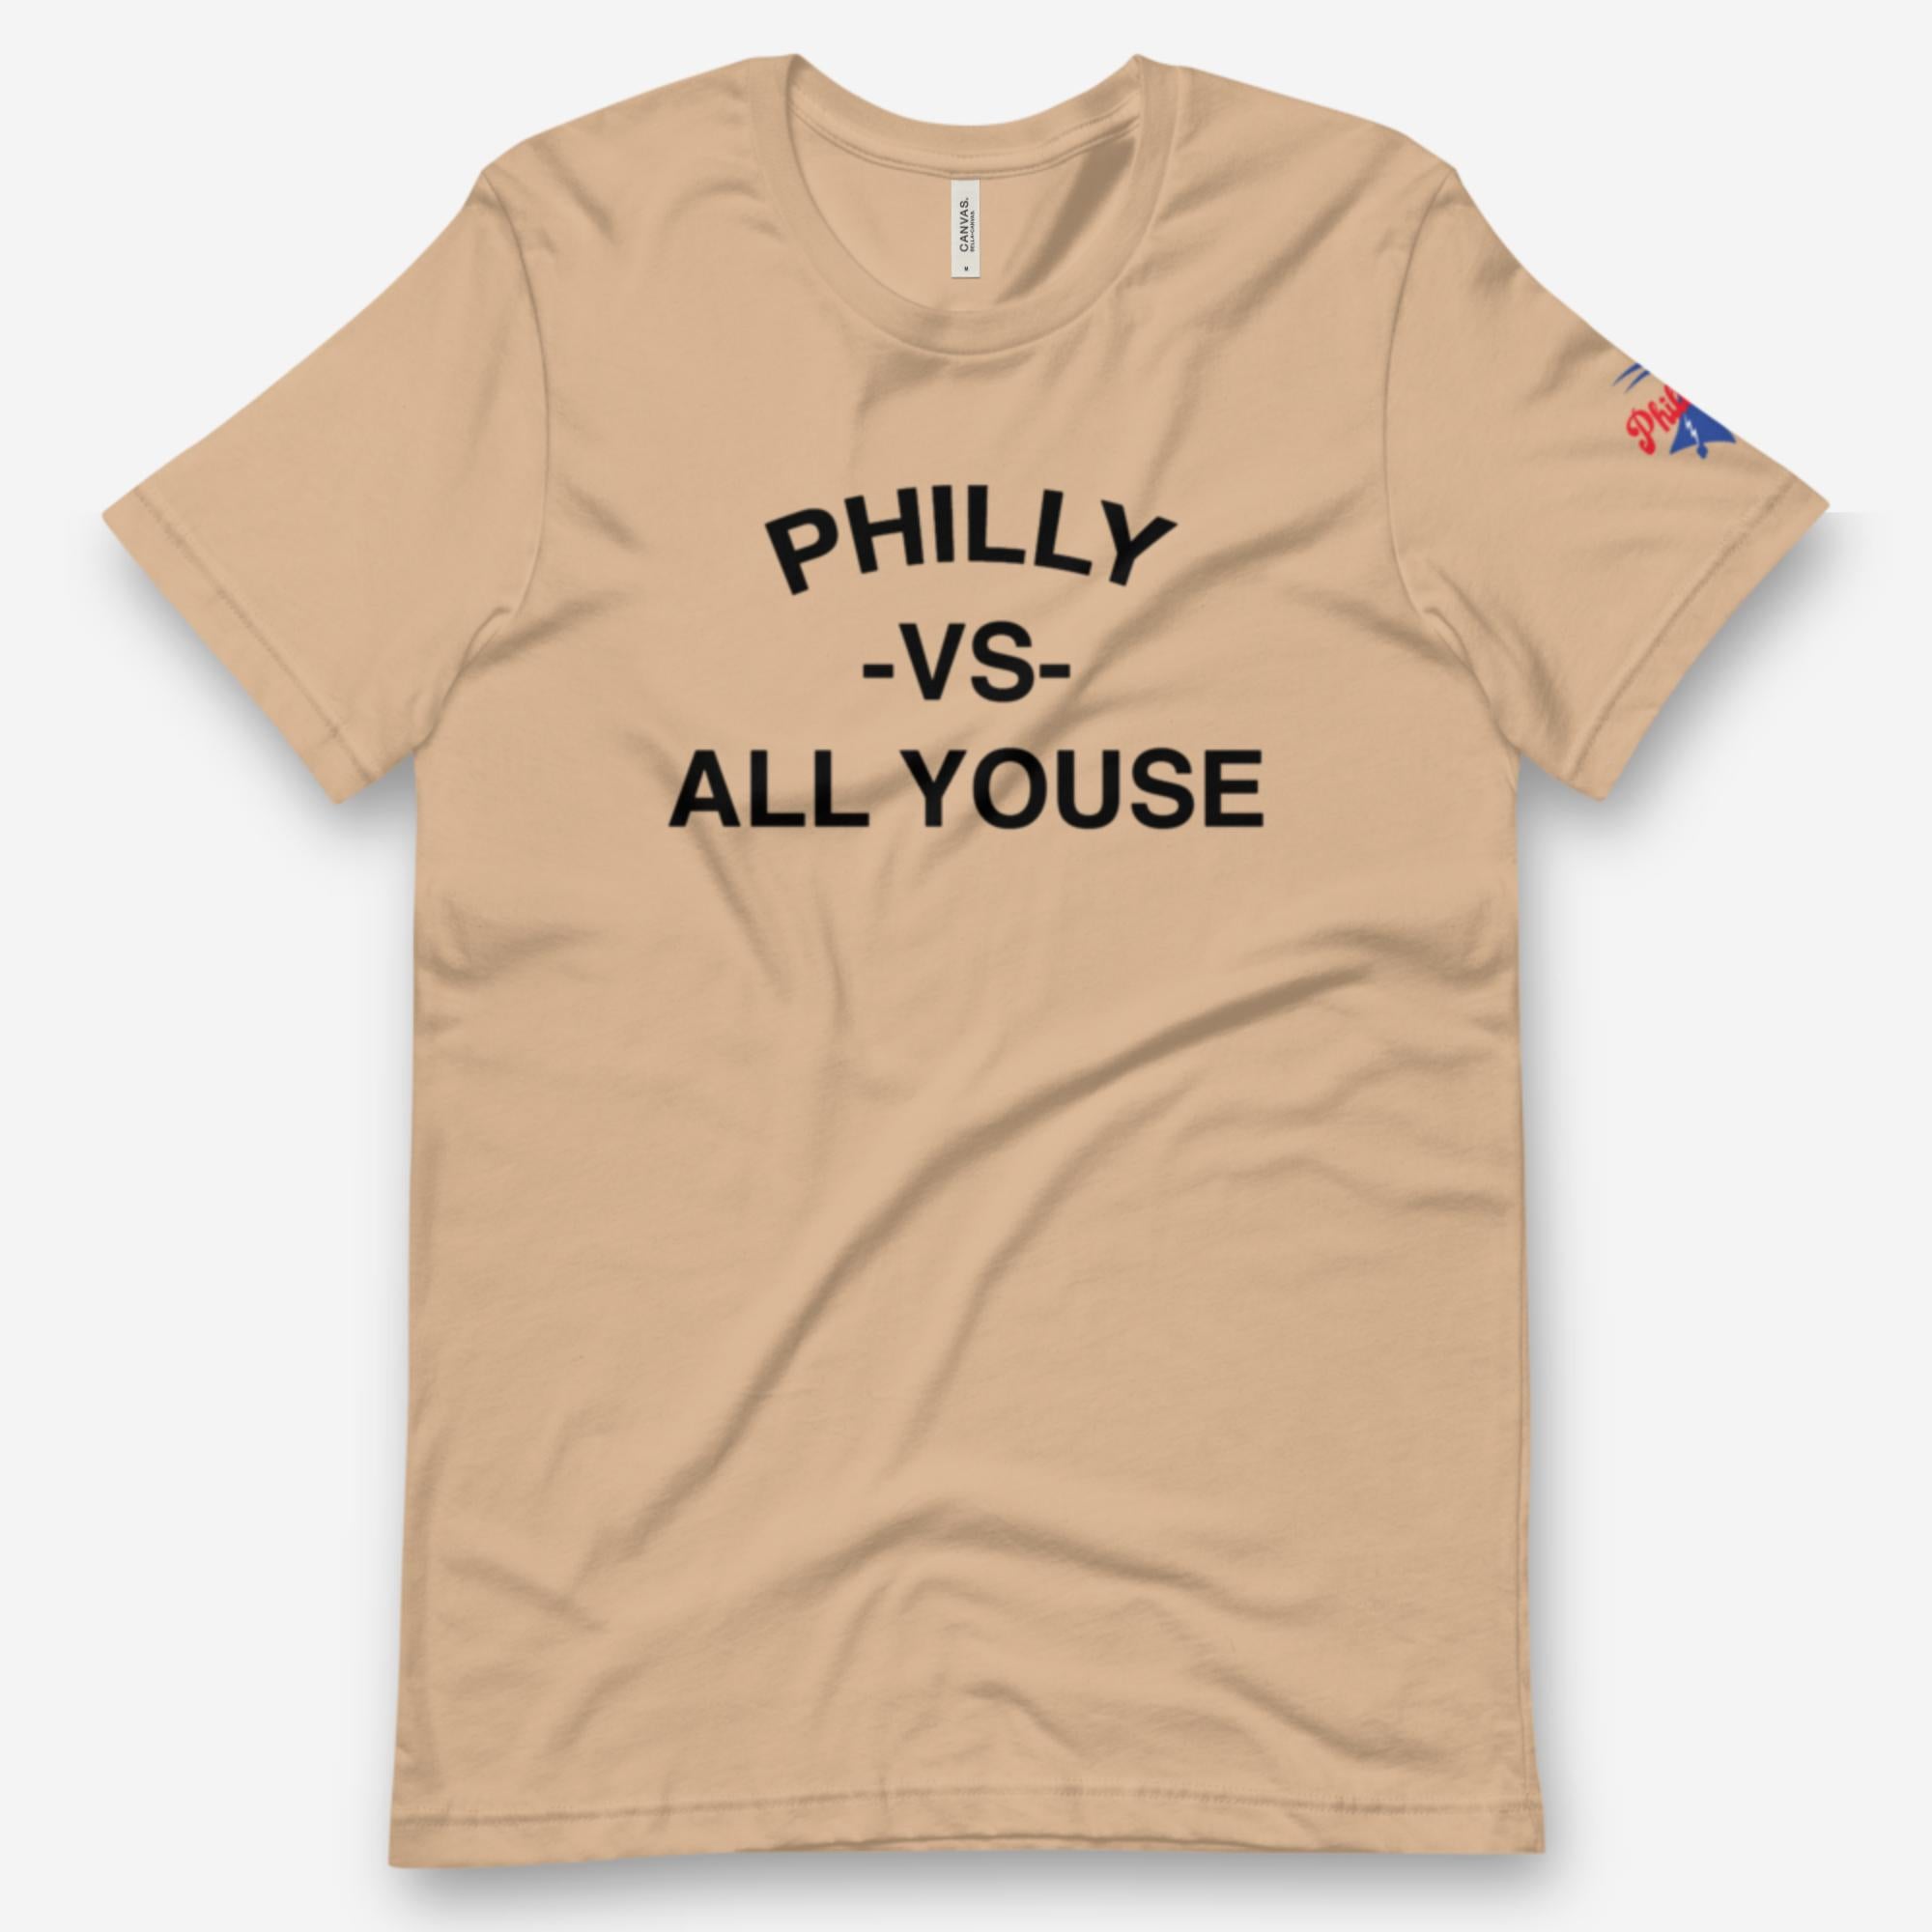 "Philly vs. All Youse" Tee